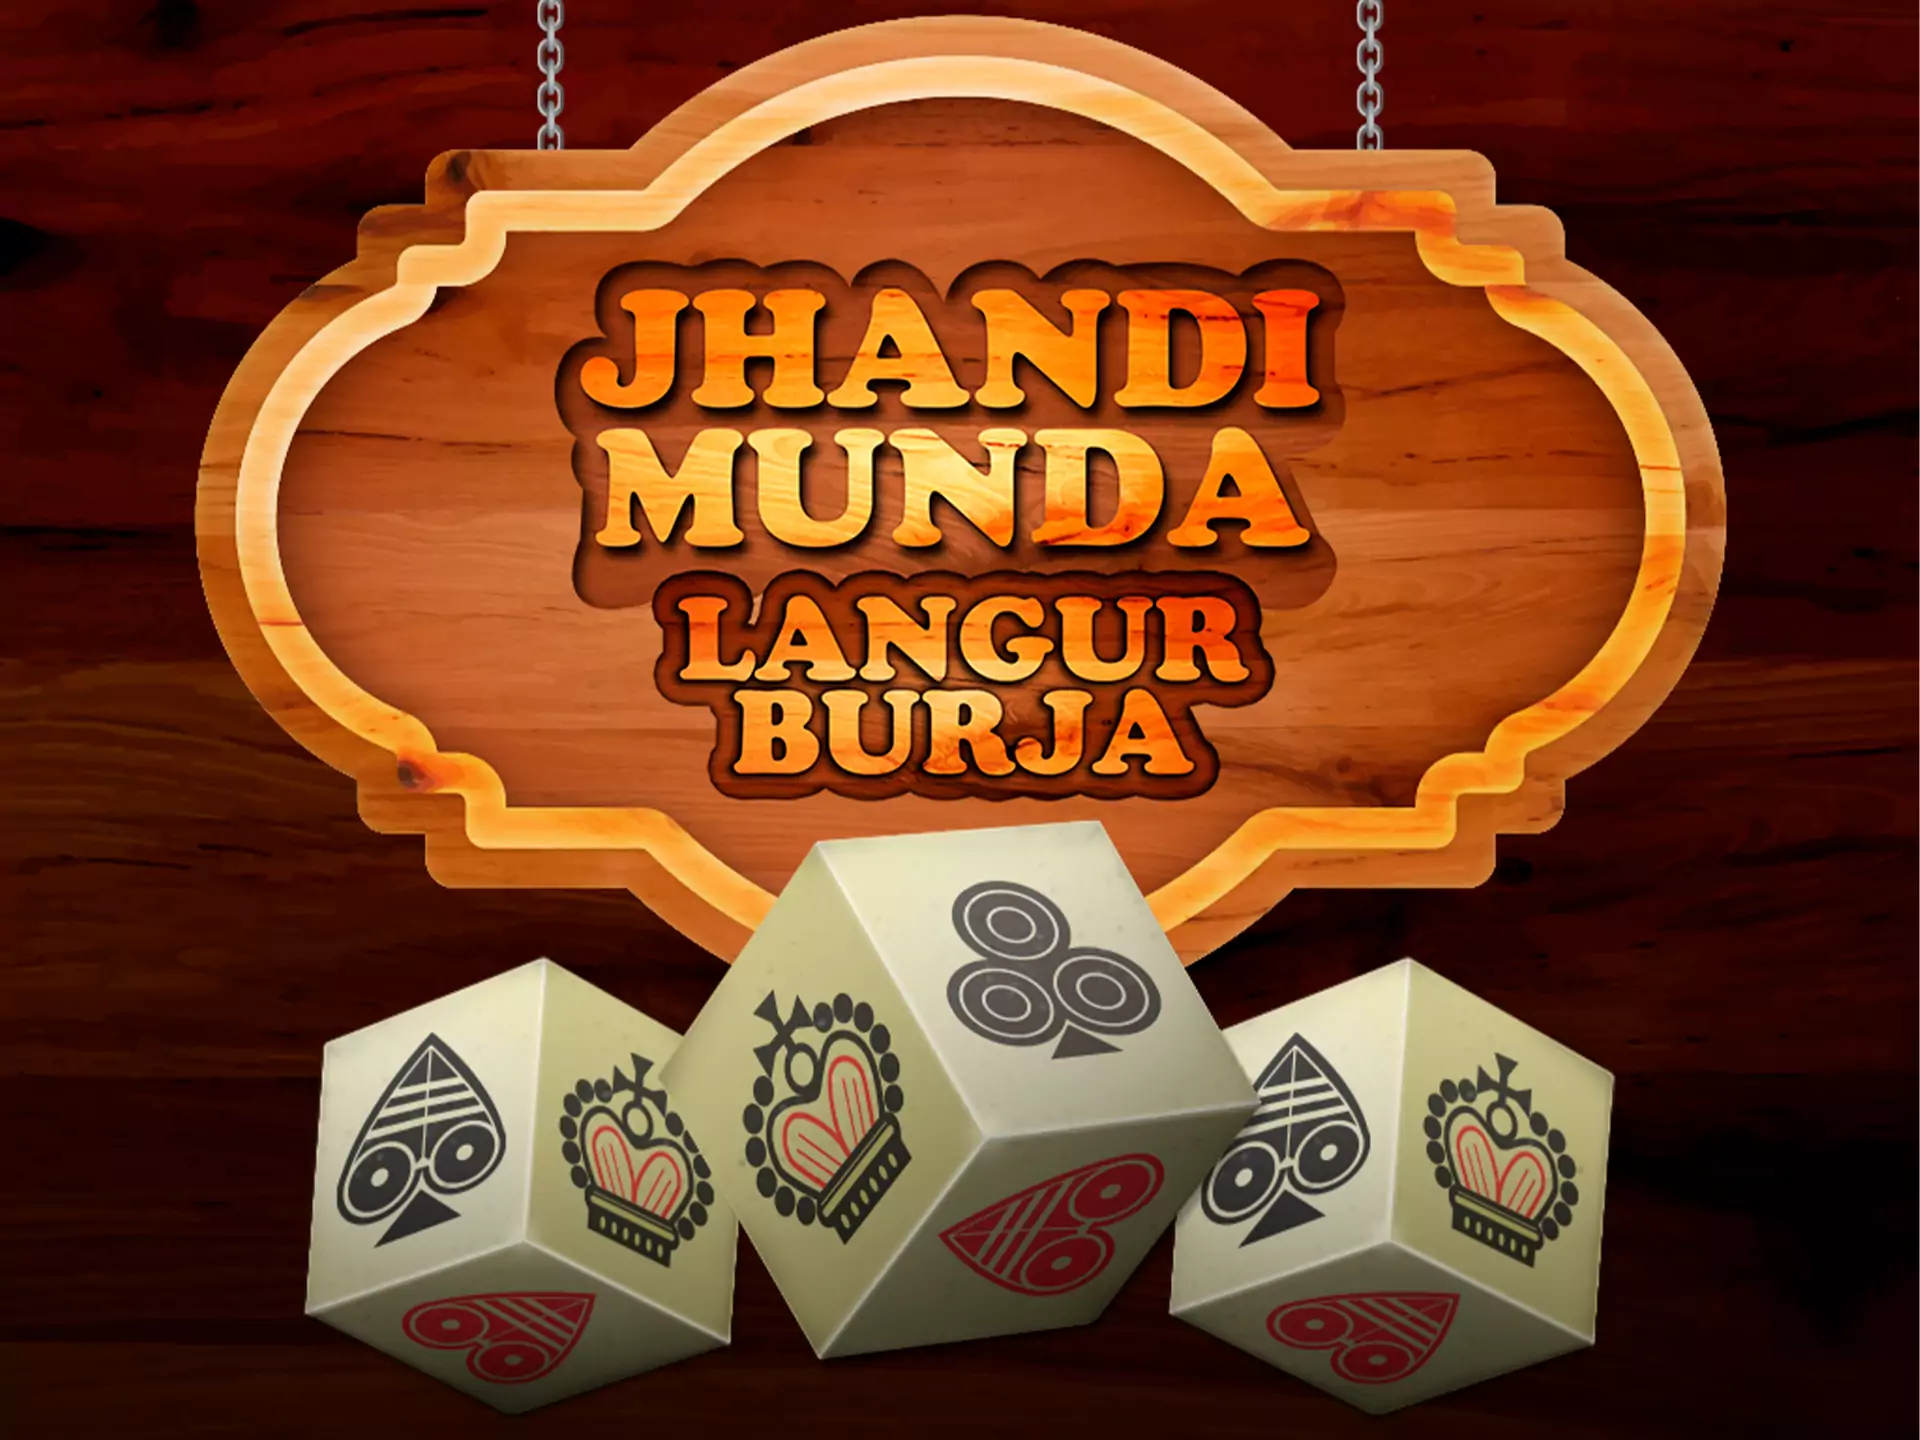 If a casino has the Jhandi Munda game then it's a really Indian-friendly site.